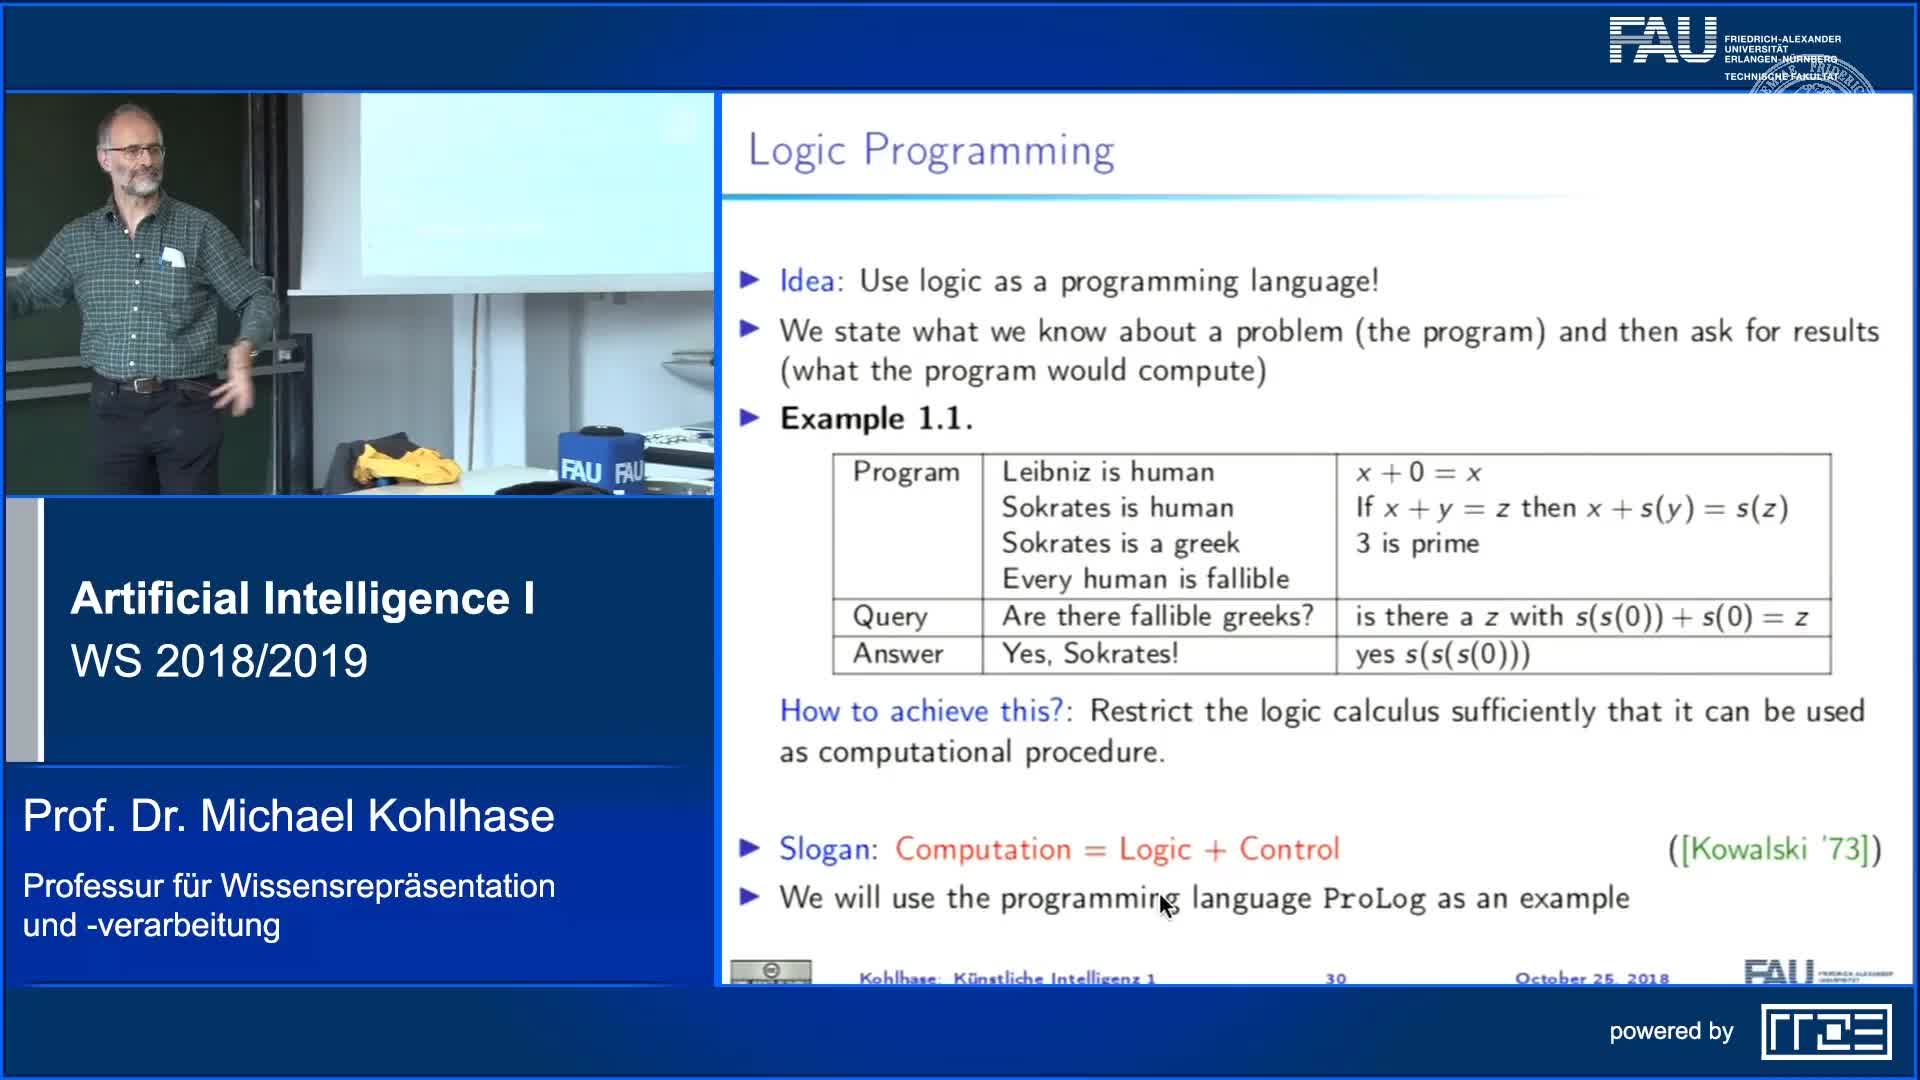 Introduction to Logic Programming and PROLOG (Part 2) preview image